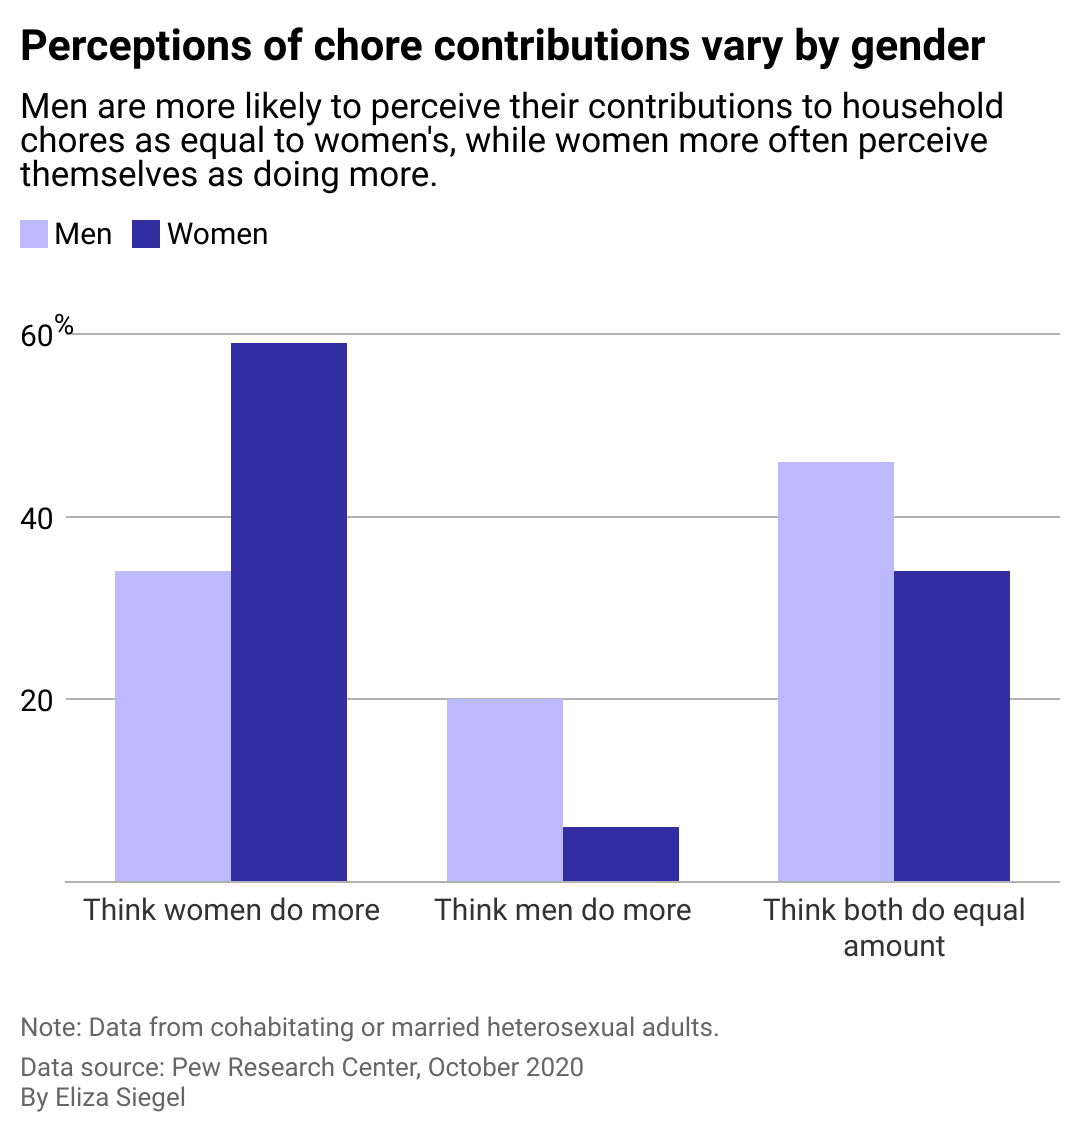 Column chart showing how perceptions of chore contributions vary by gender. Men are more likely to think they contribute equally to women, while women are more likely to see their own contributions as greater than mens